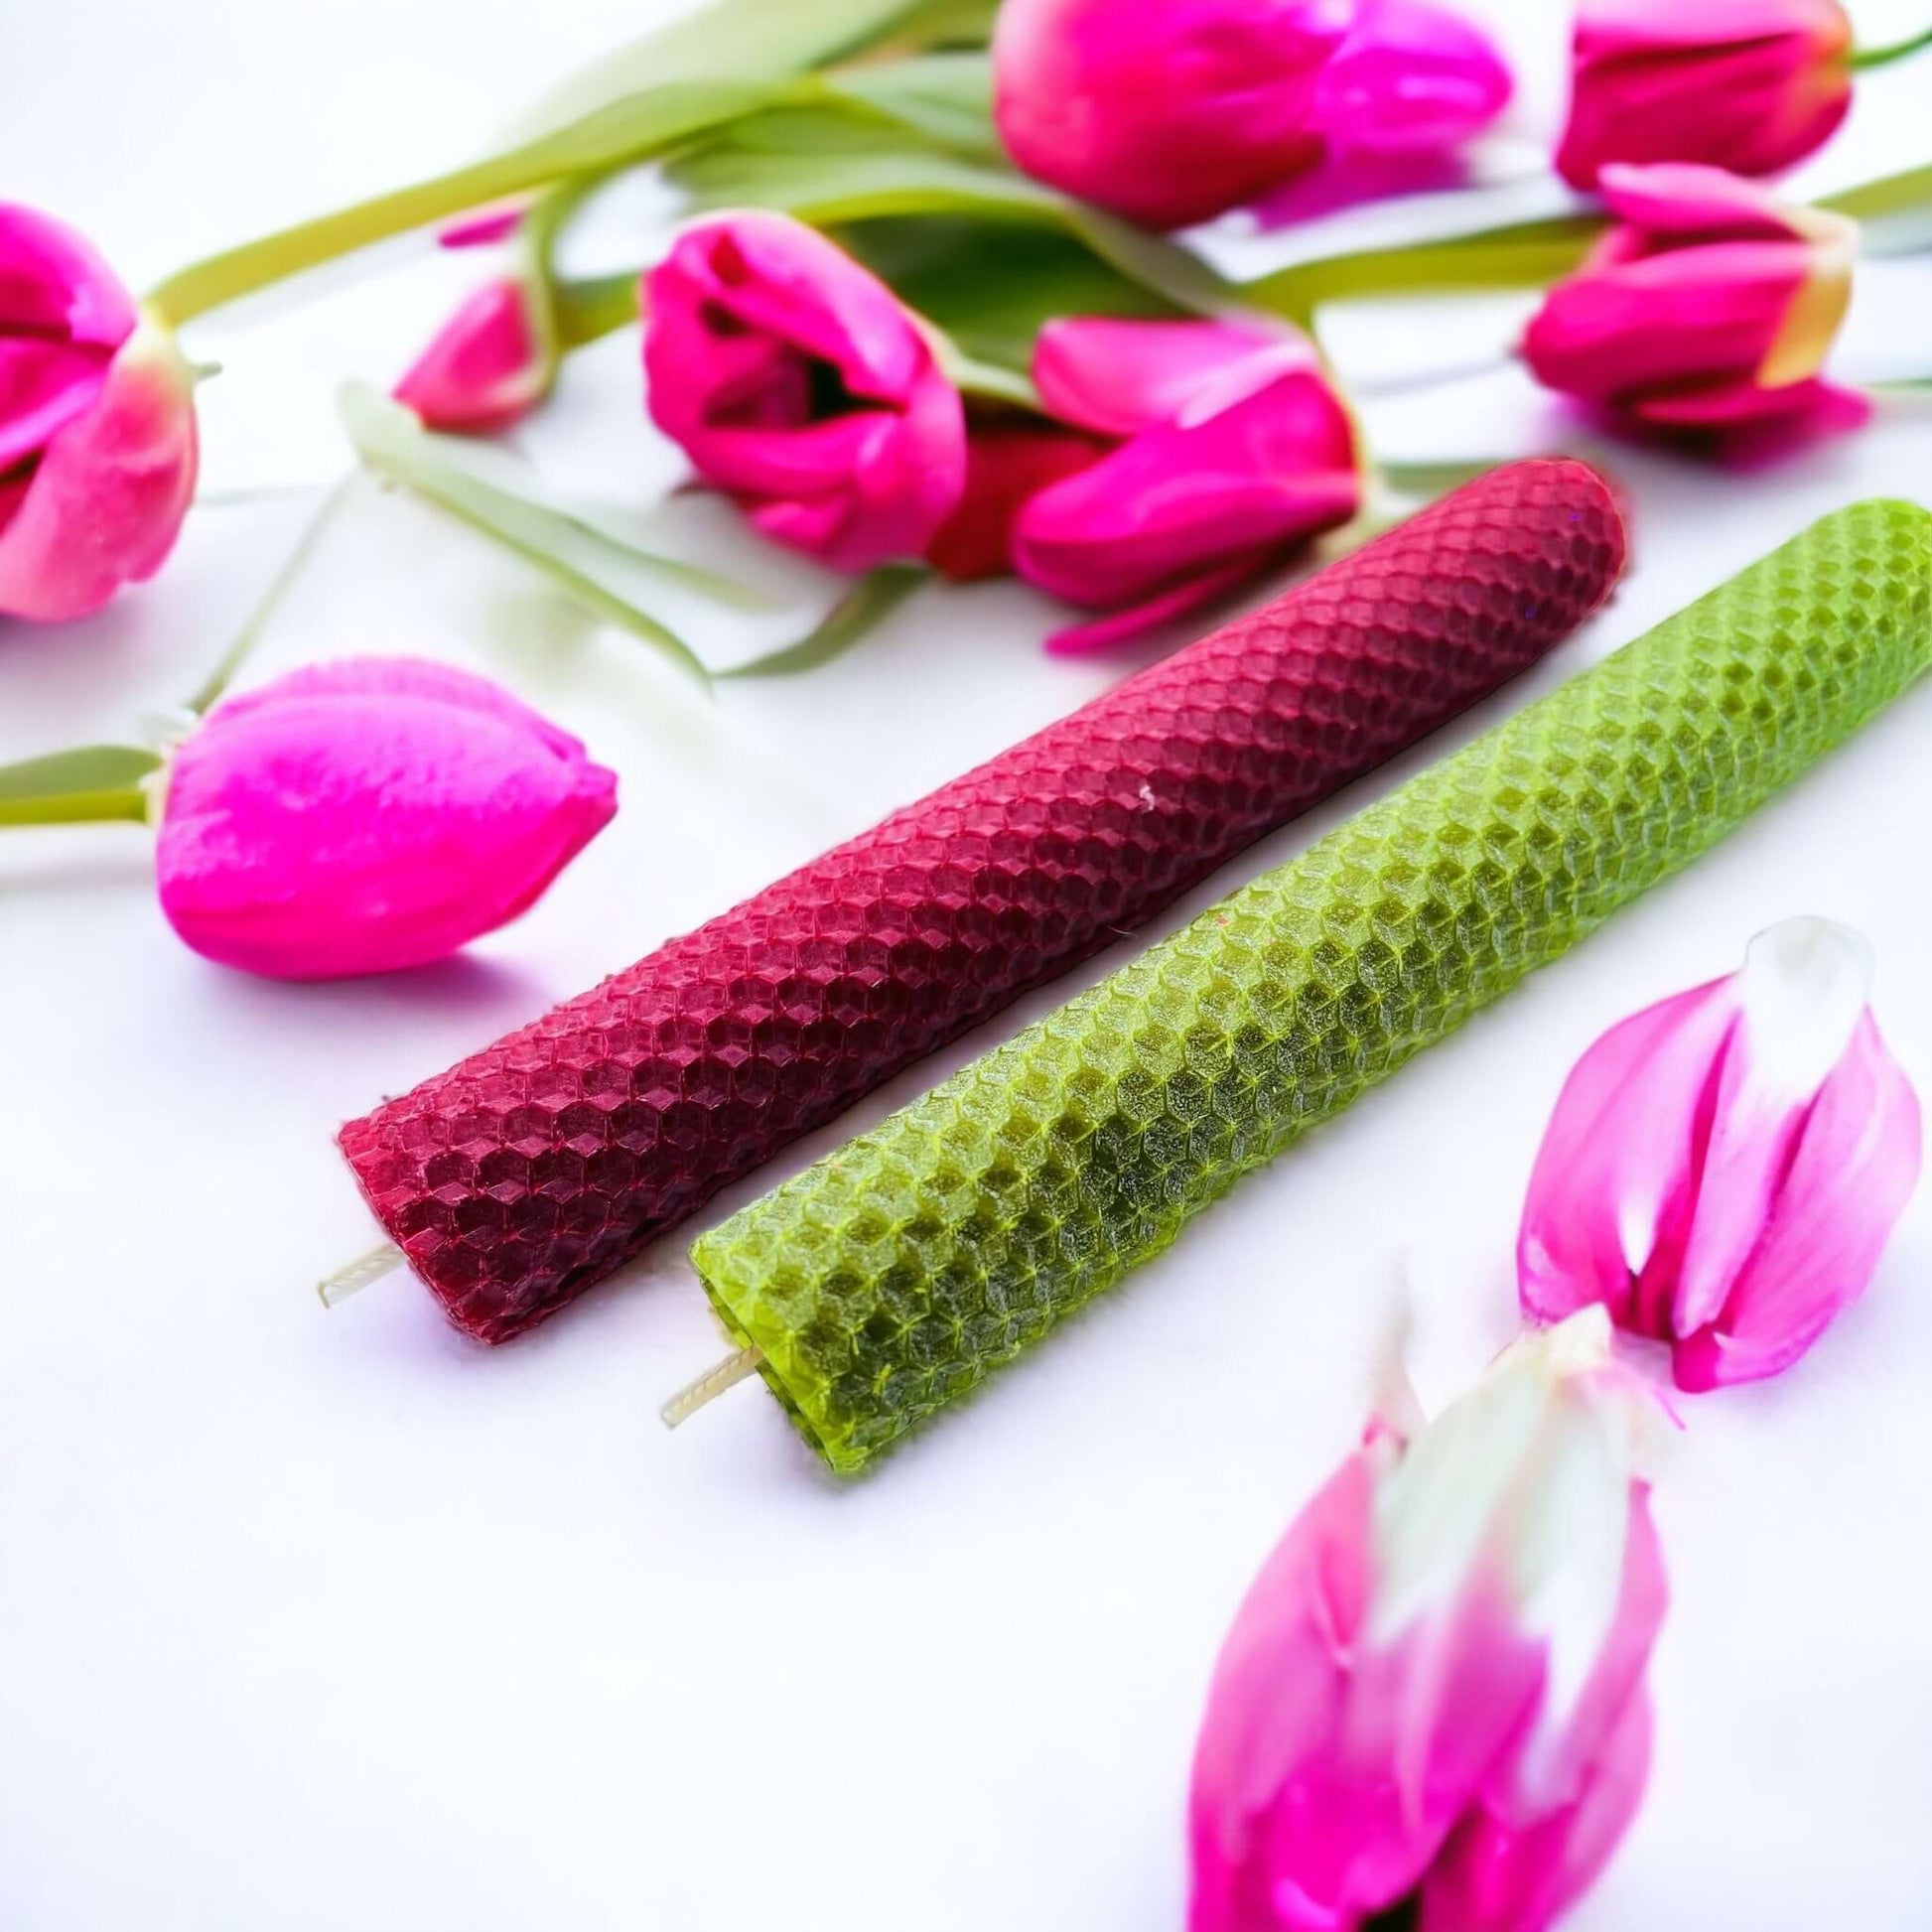 red and green hand rolled beeswax candles surounded by flowers.